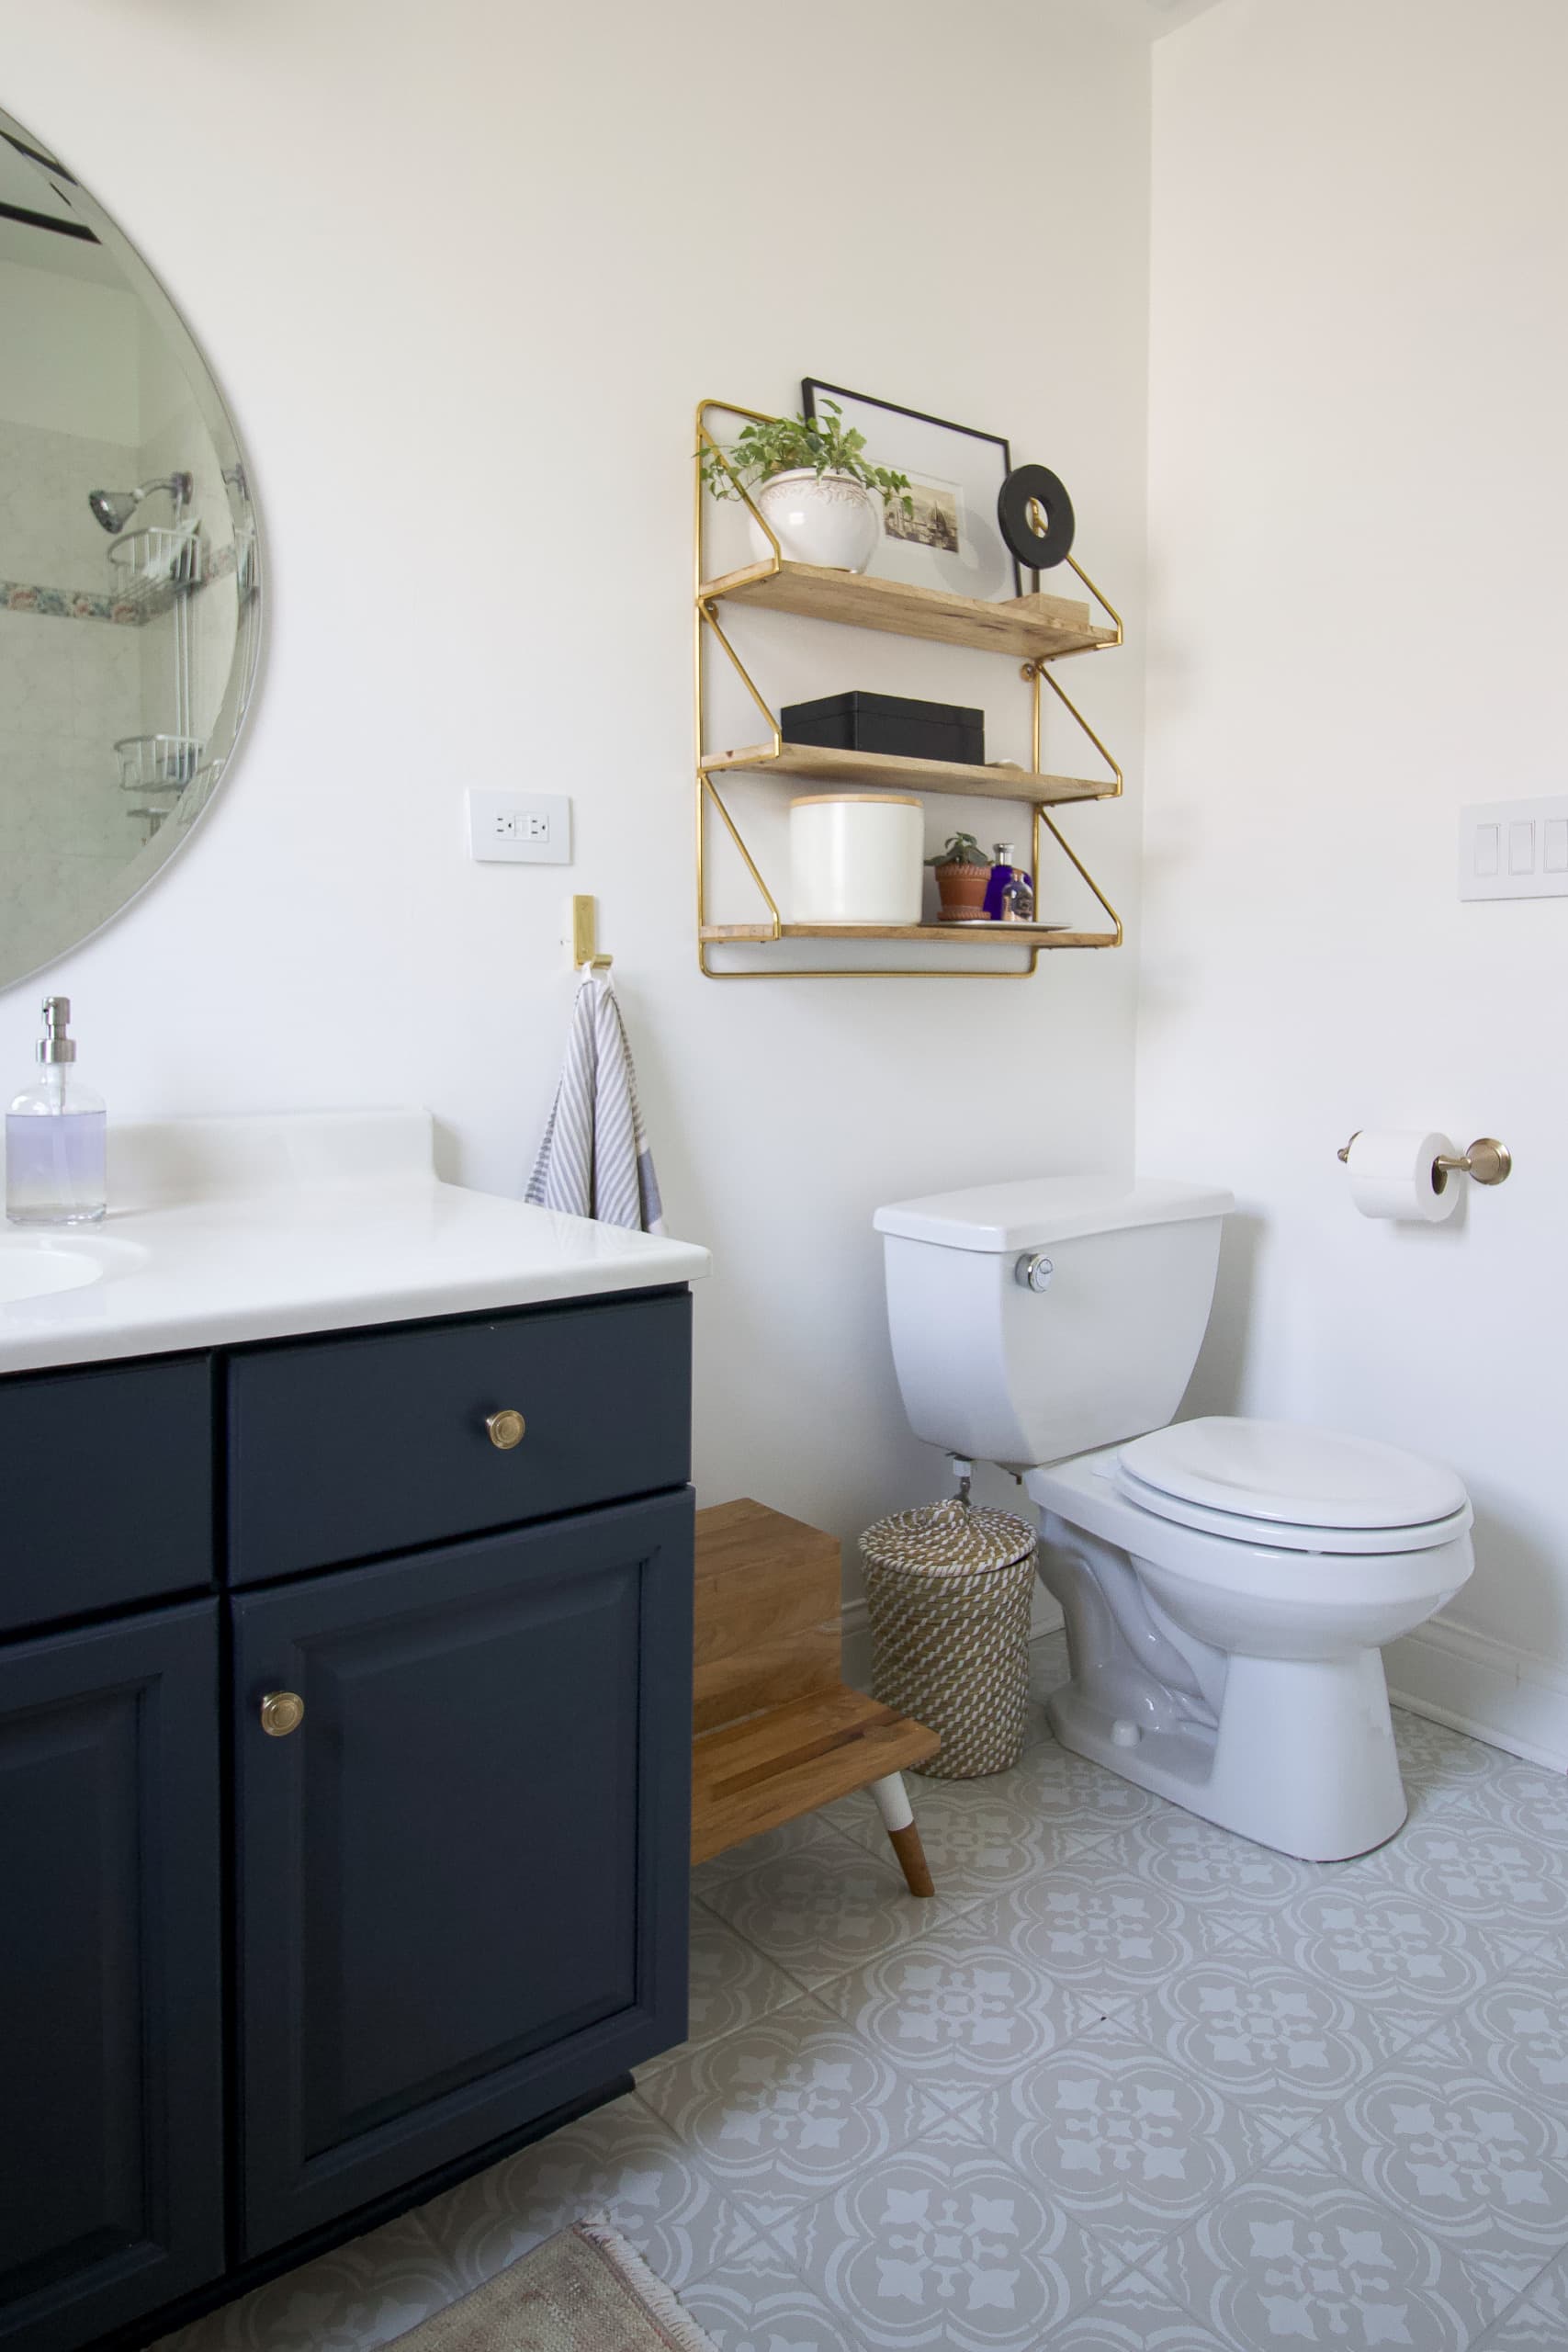 Adding wood shelves over a toilet